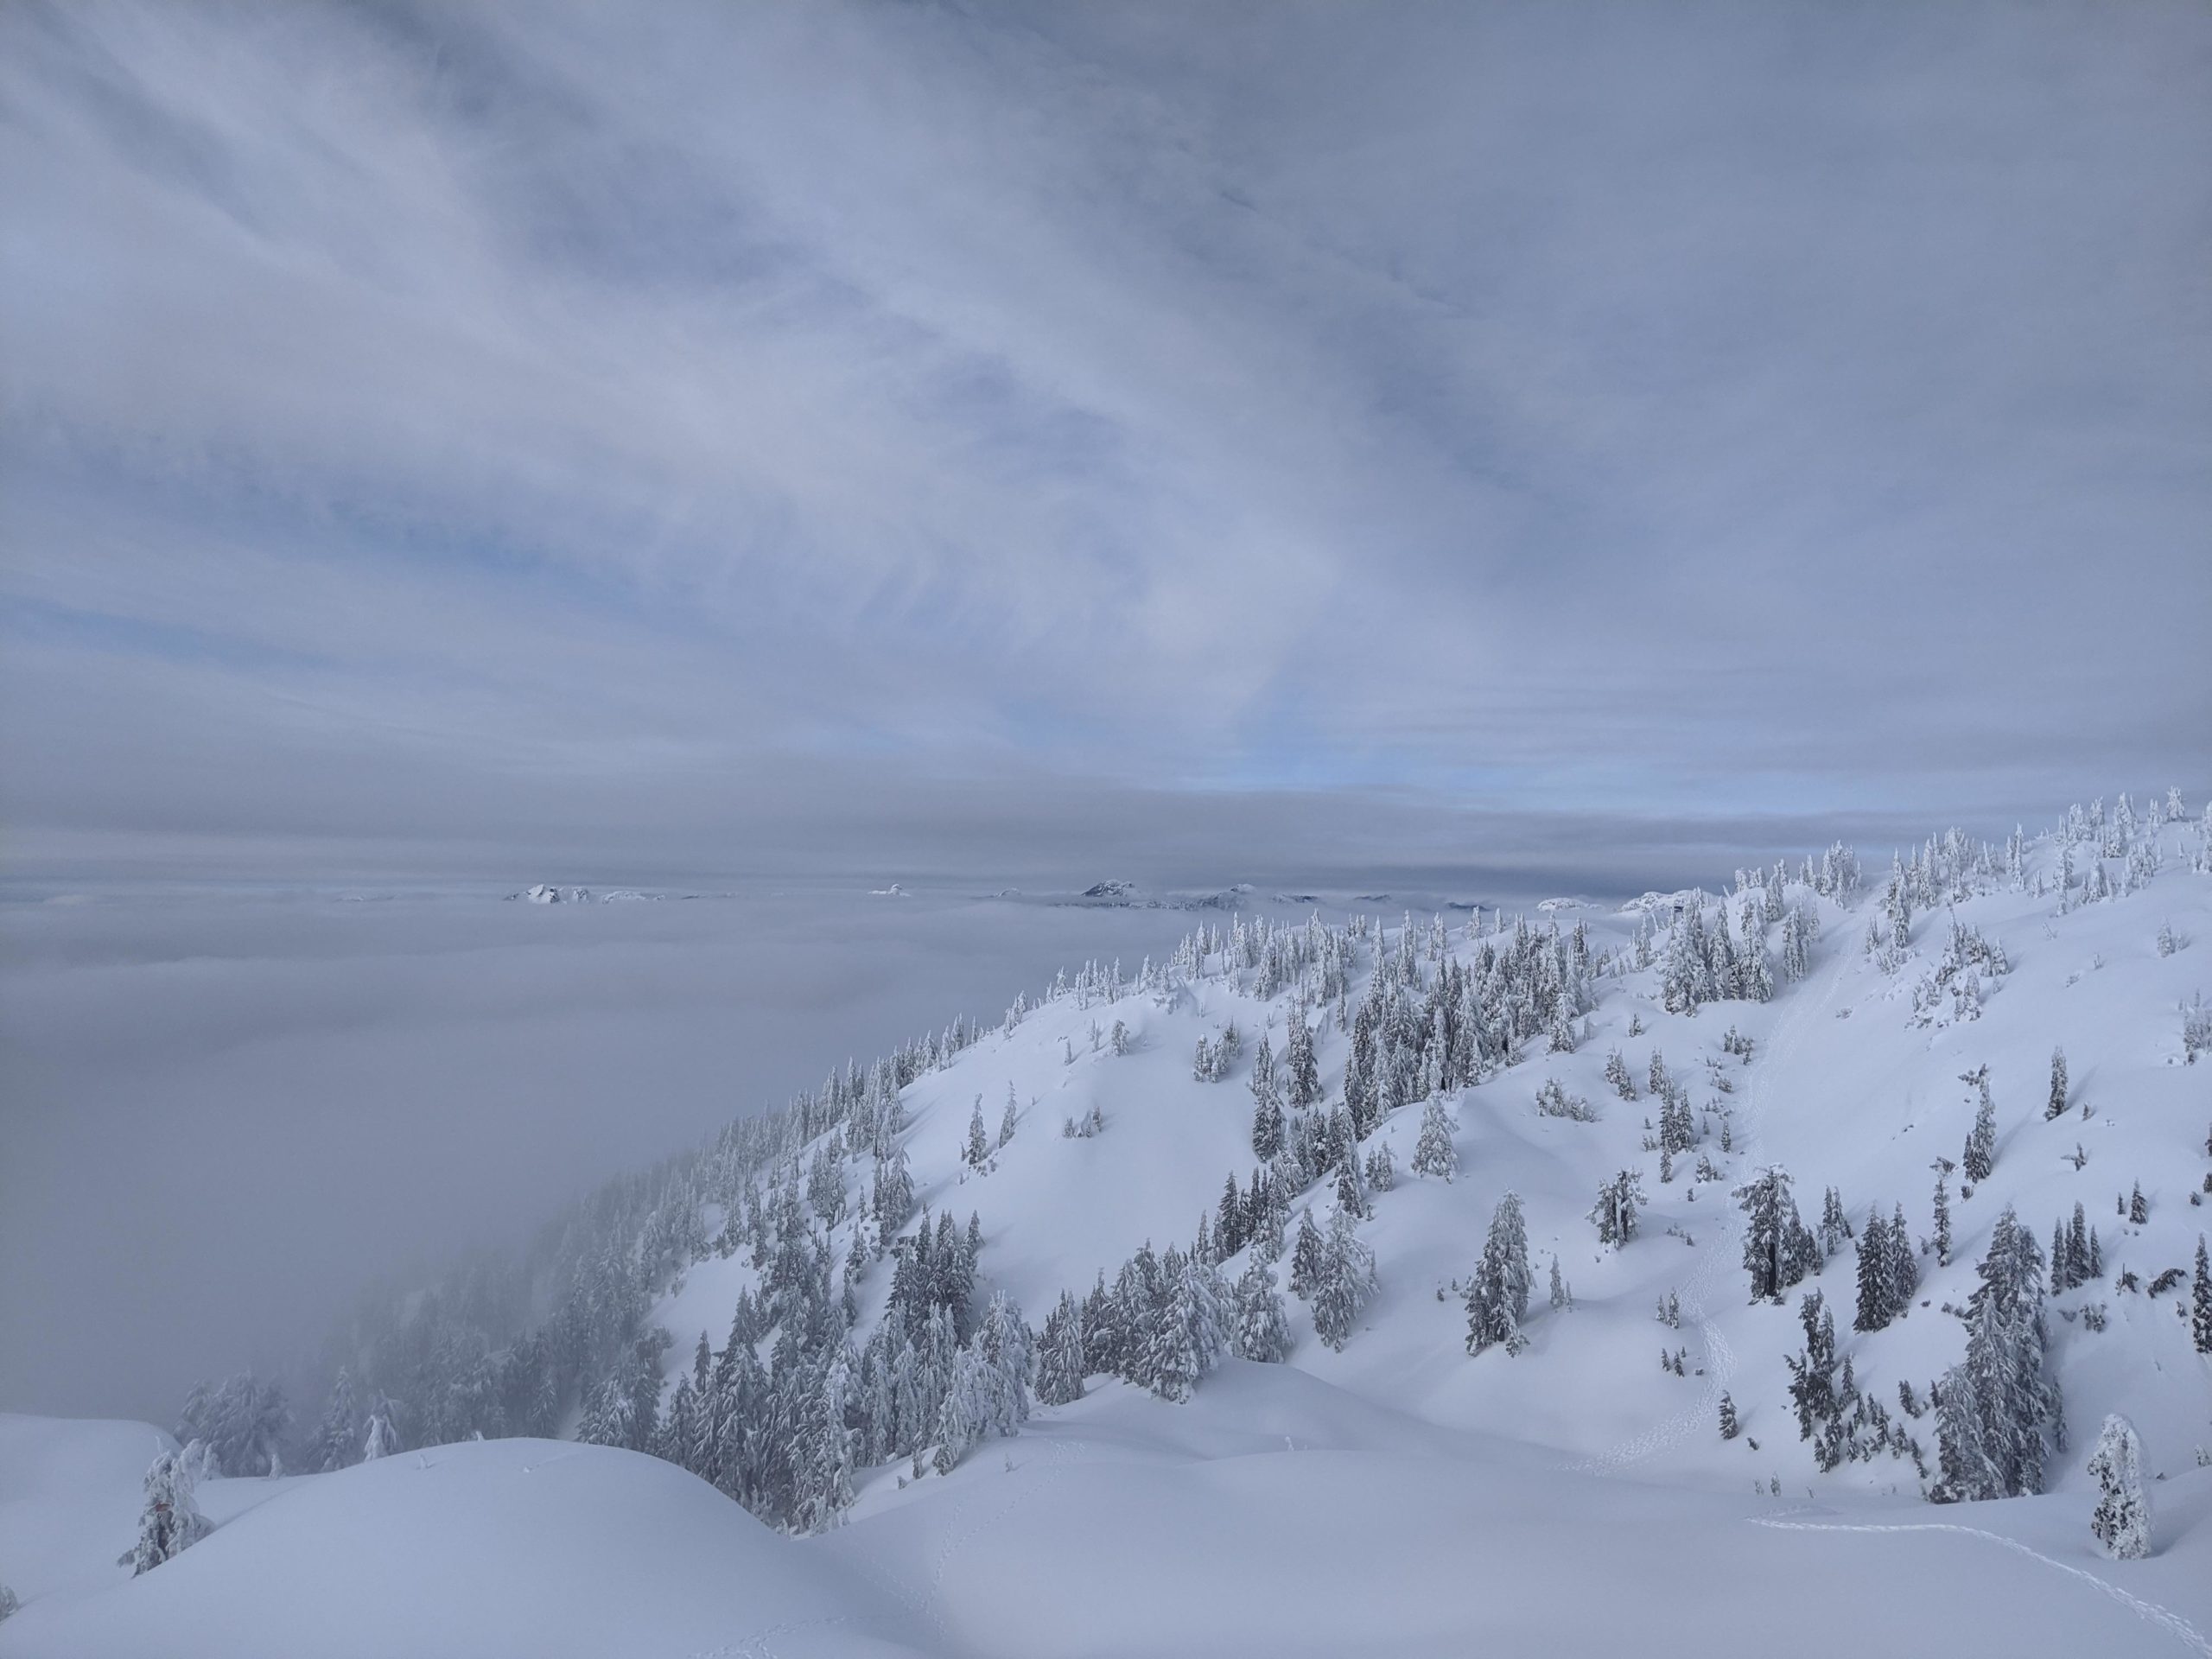 A shot of a peak on Mount Seymour with clouds hanging around the mountain.